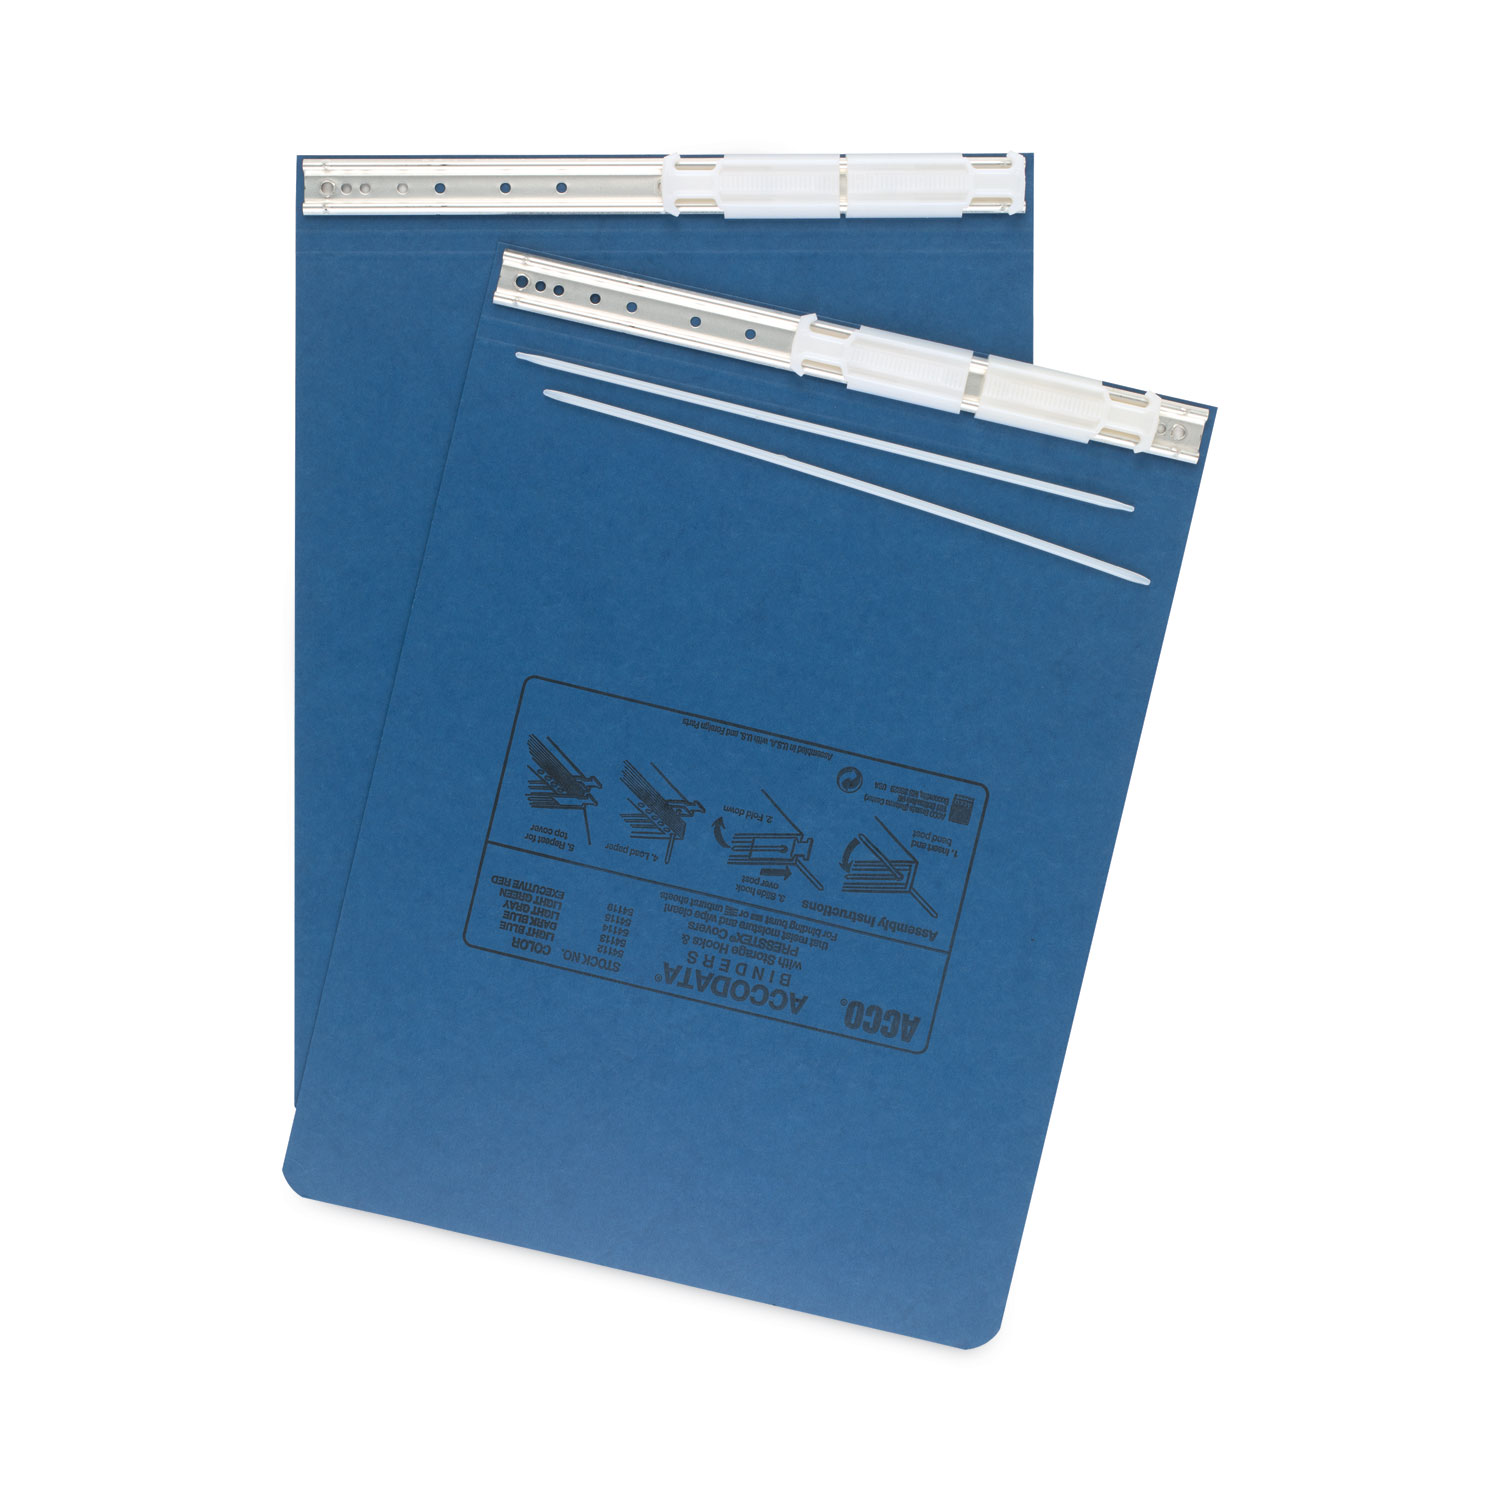 PRESSTEX Covers with Storage Hooks, 2 Posts, 6 Capacity, 9.5 x 11, Light  Blue - BOSS Office and Computer Products